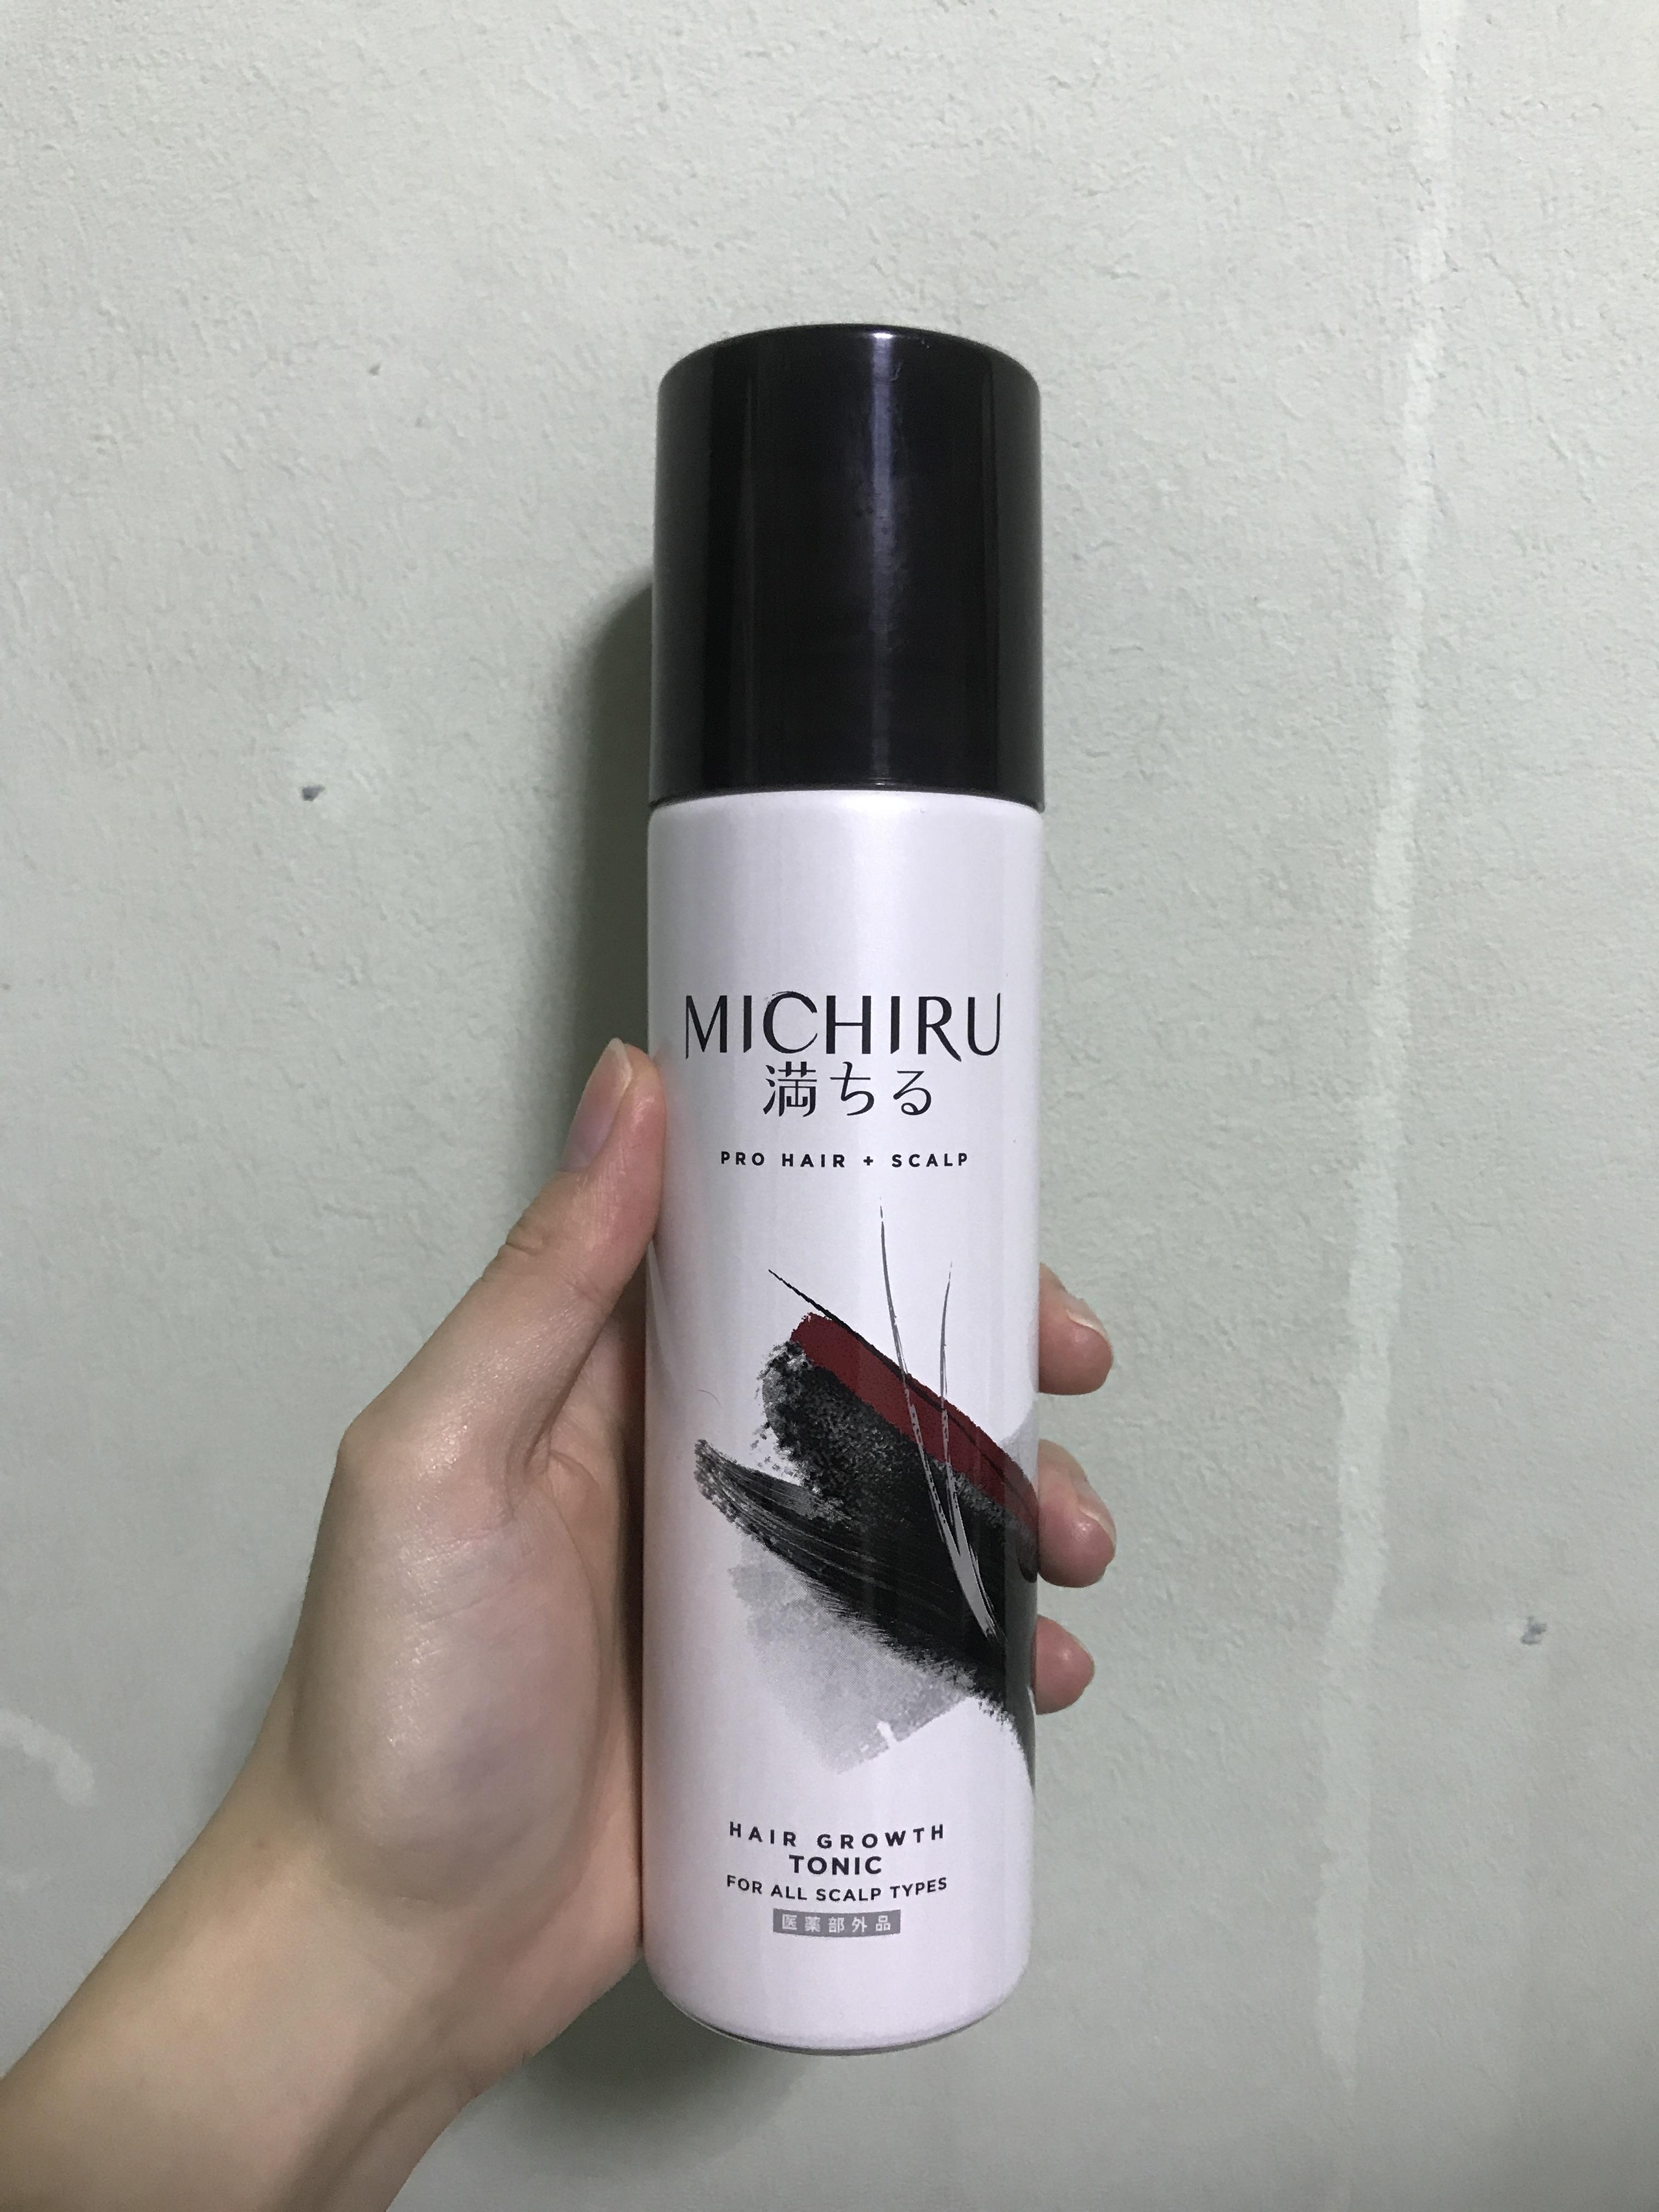 Hair growth tonic by Michiru : review - Hair styling & treatments-  